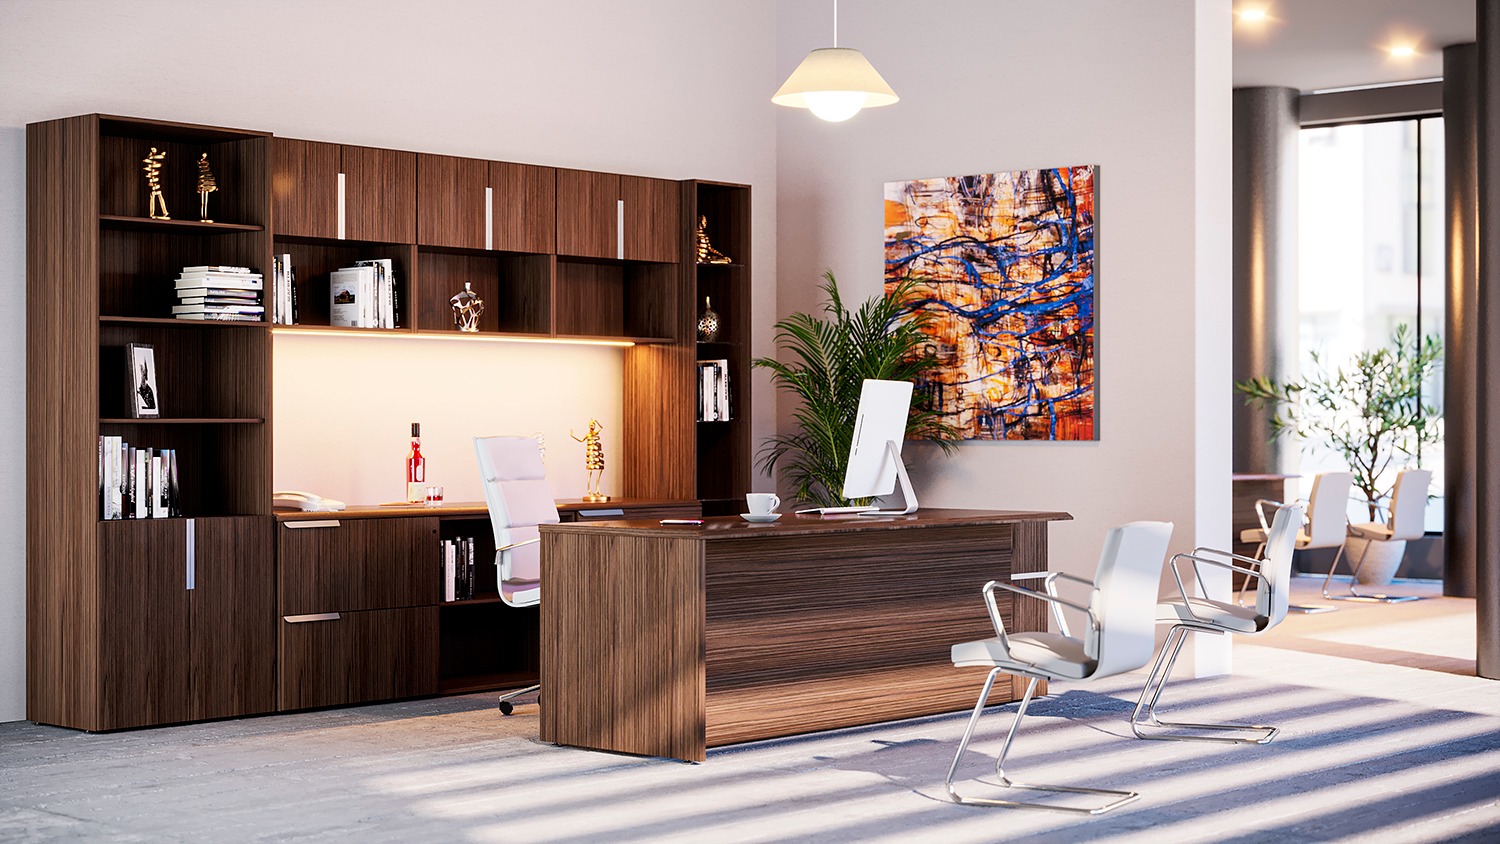 Why materials matter: how to choose quality office furniture